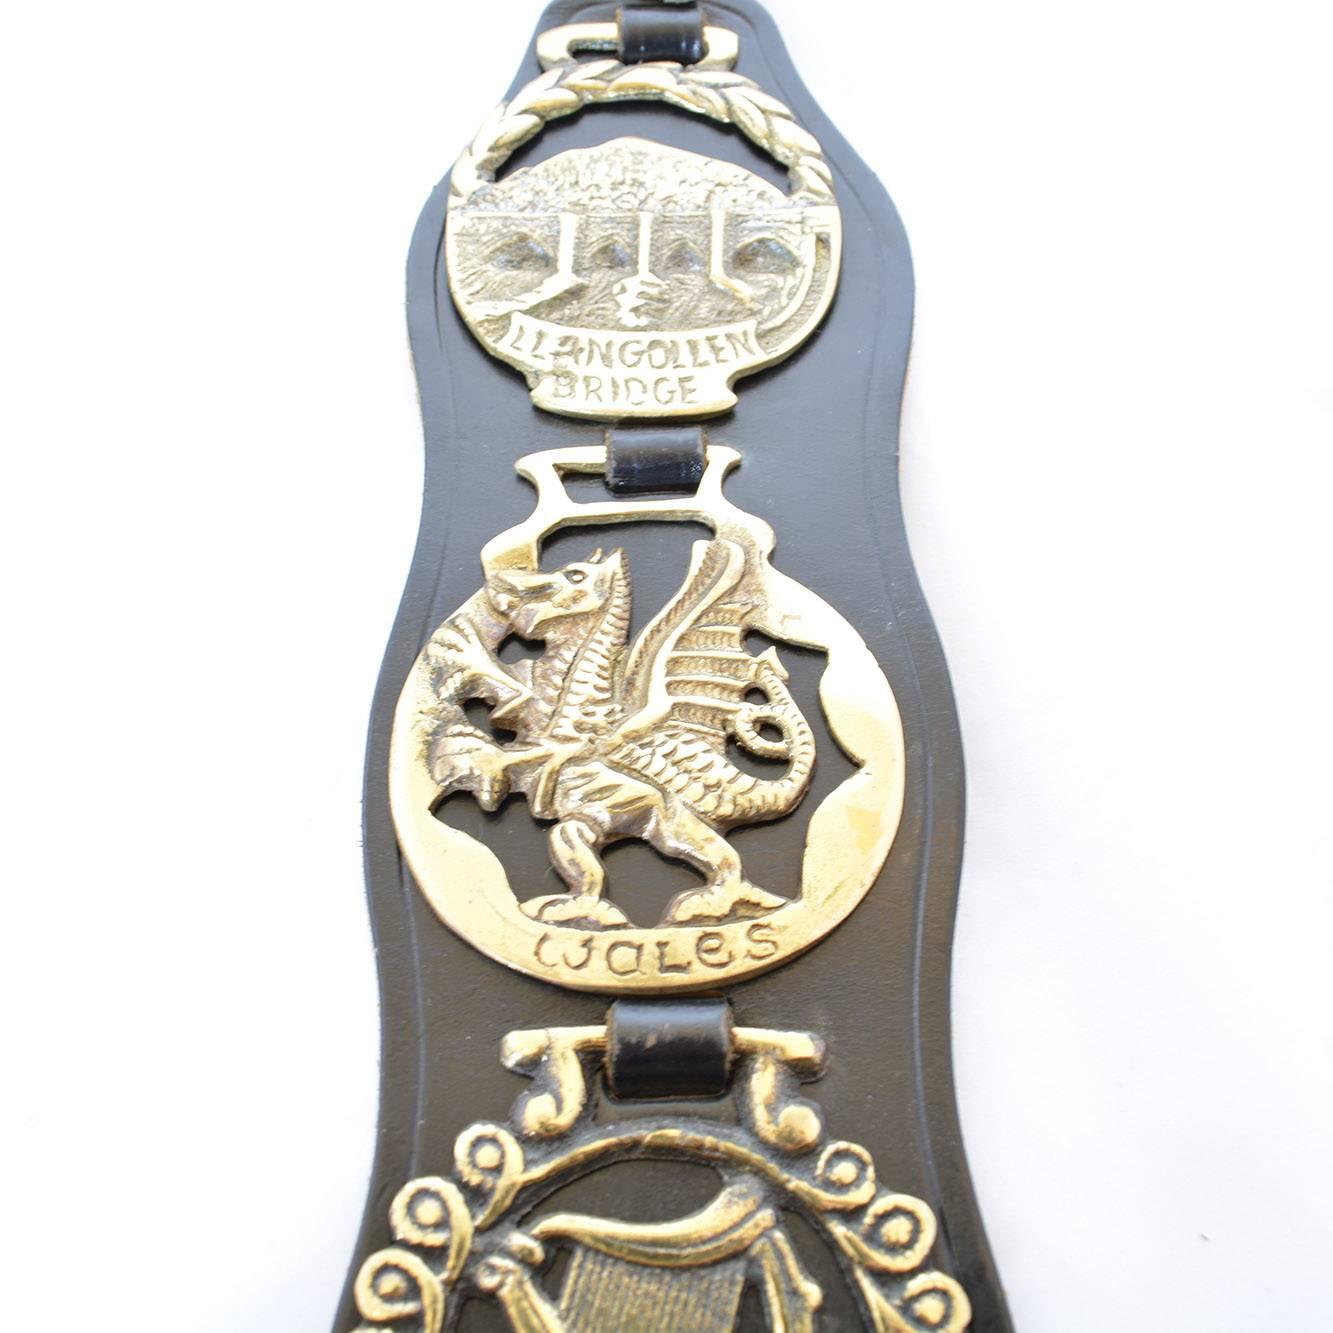 This equestrian themed vintage wall hanging has four horse brasses on a leather strap. The four horse brasses portray various items including a Llangollen Bridge, Welsh dragon, triple harp, and the coracle man. Each object depicted is associated